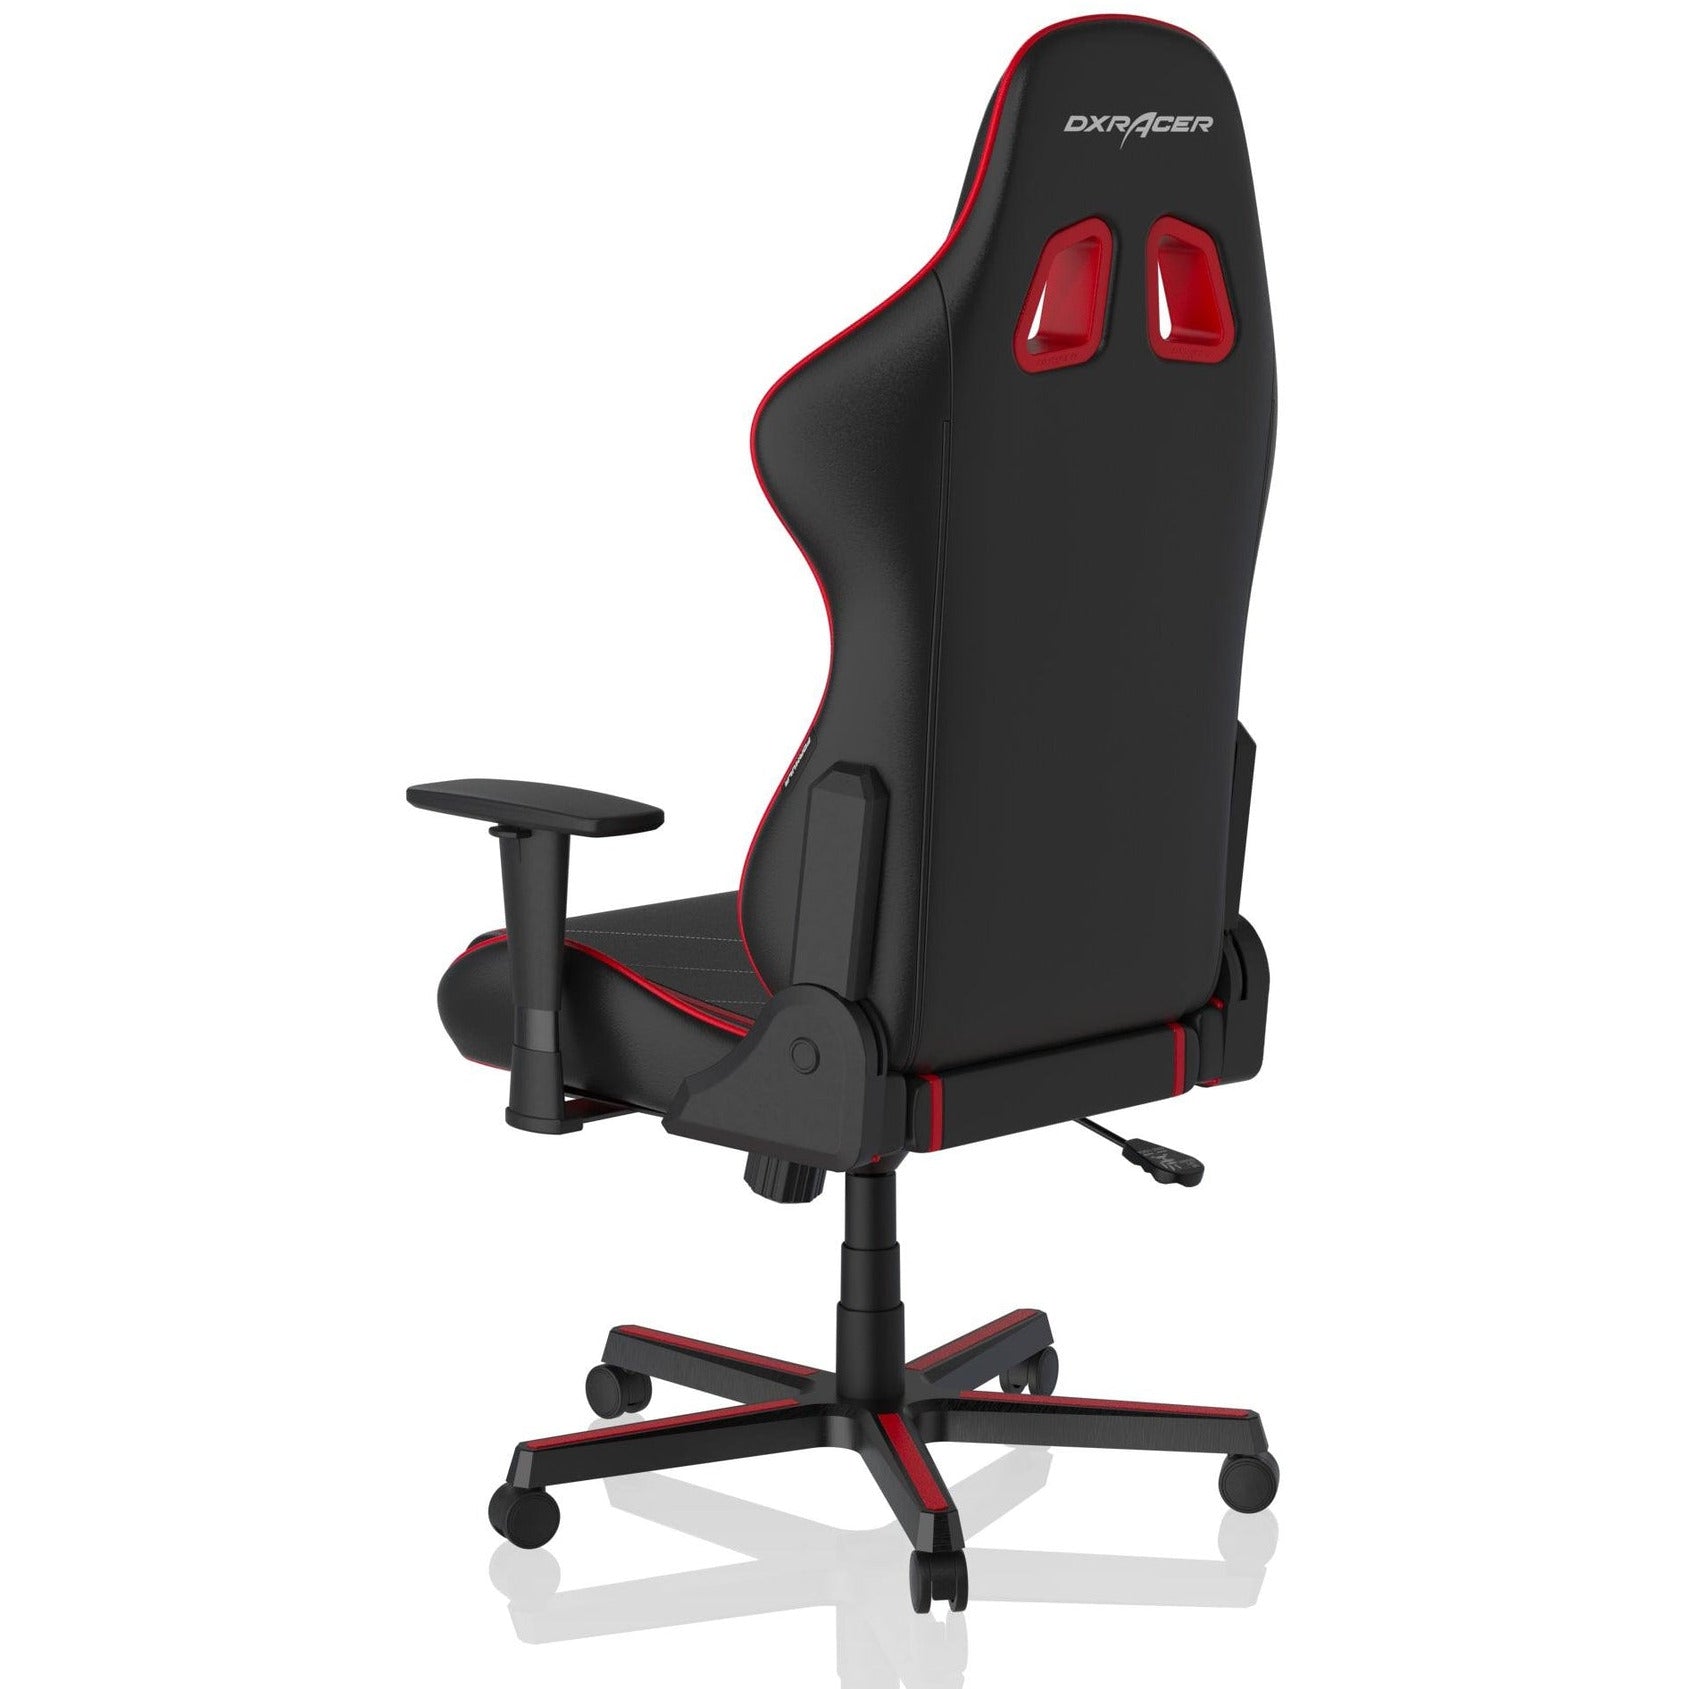 DXRacer FR08 Red and Black Gaming Chair